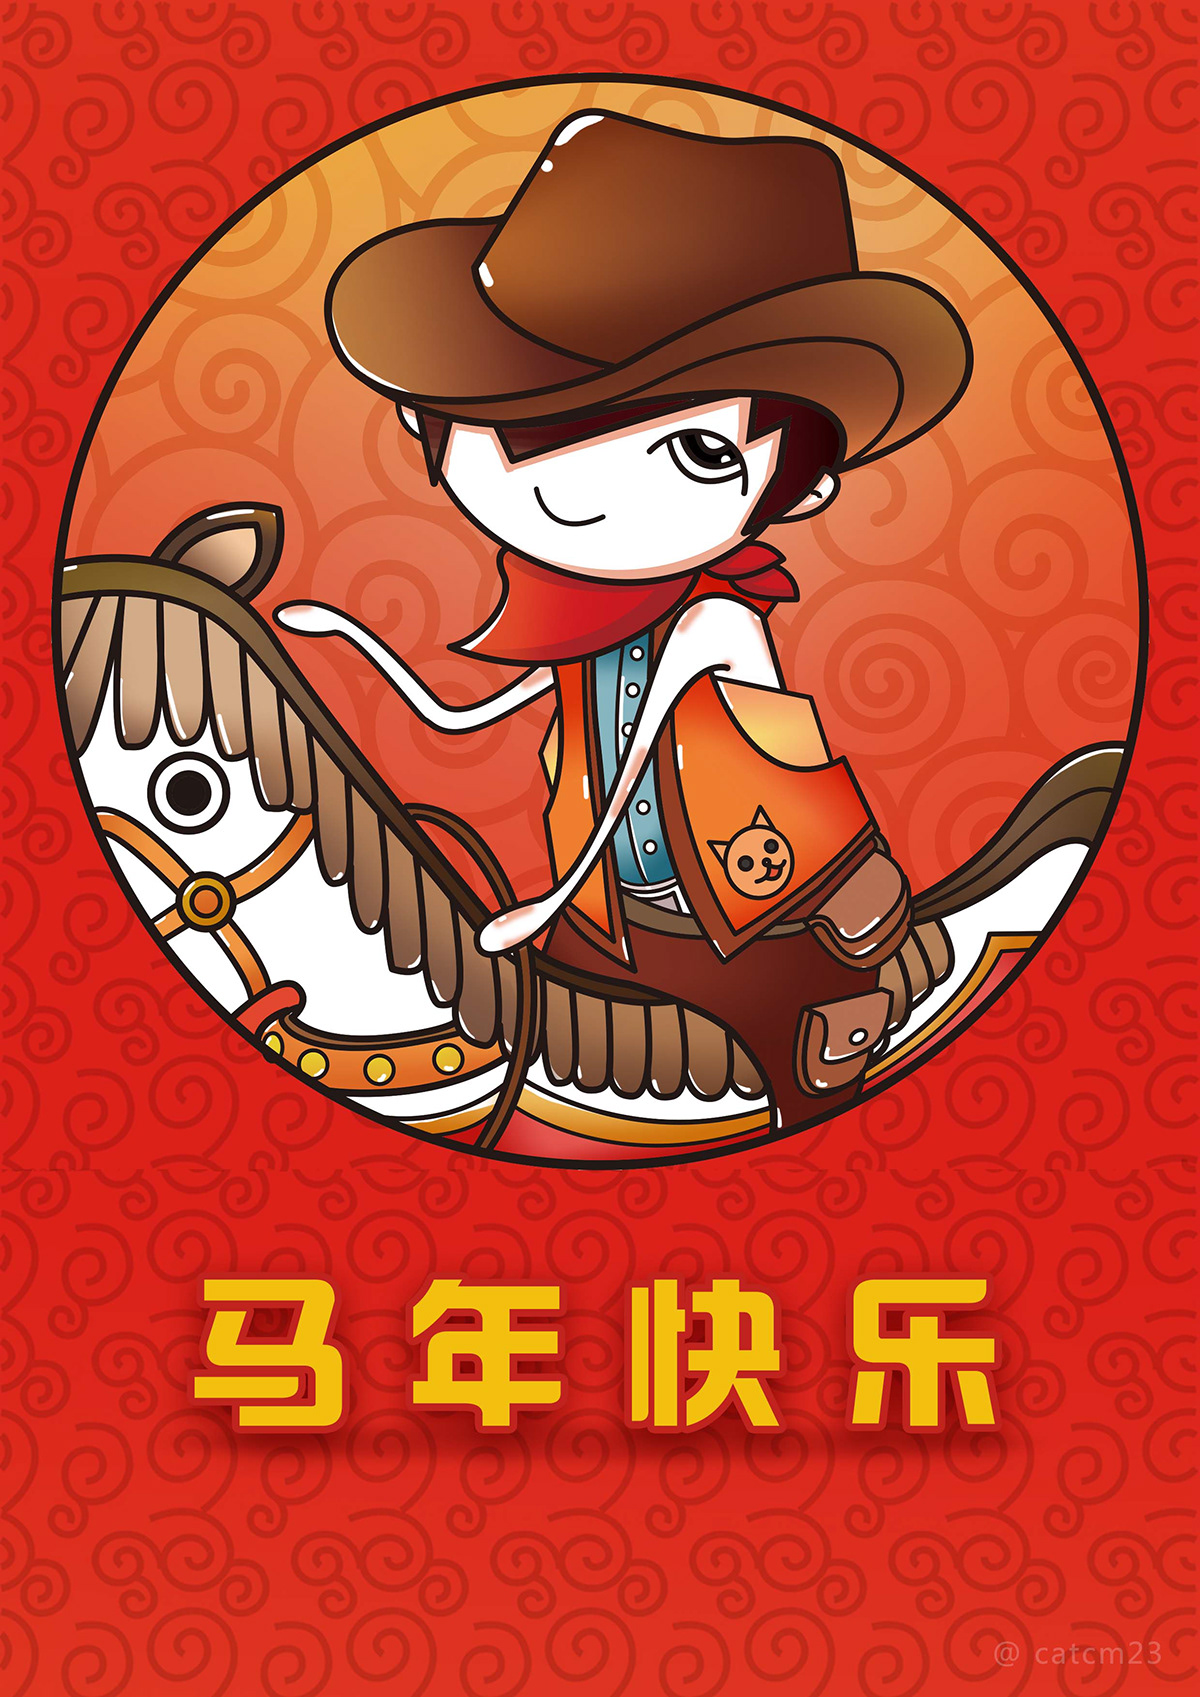 Happy year of the horse